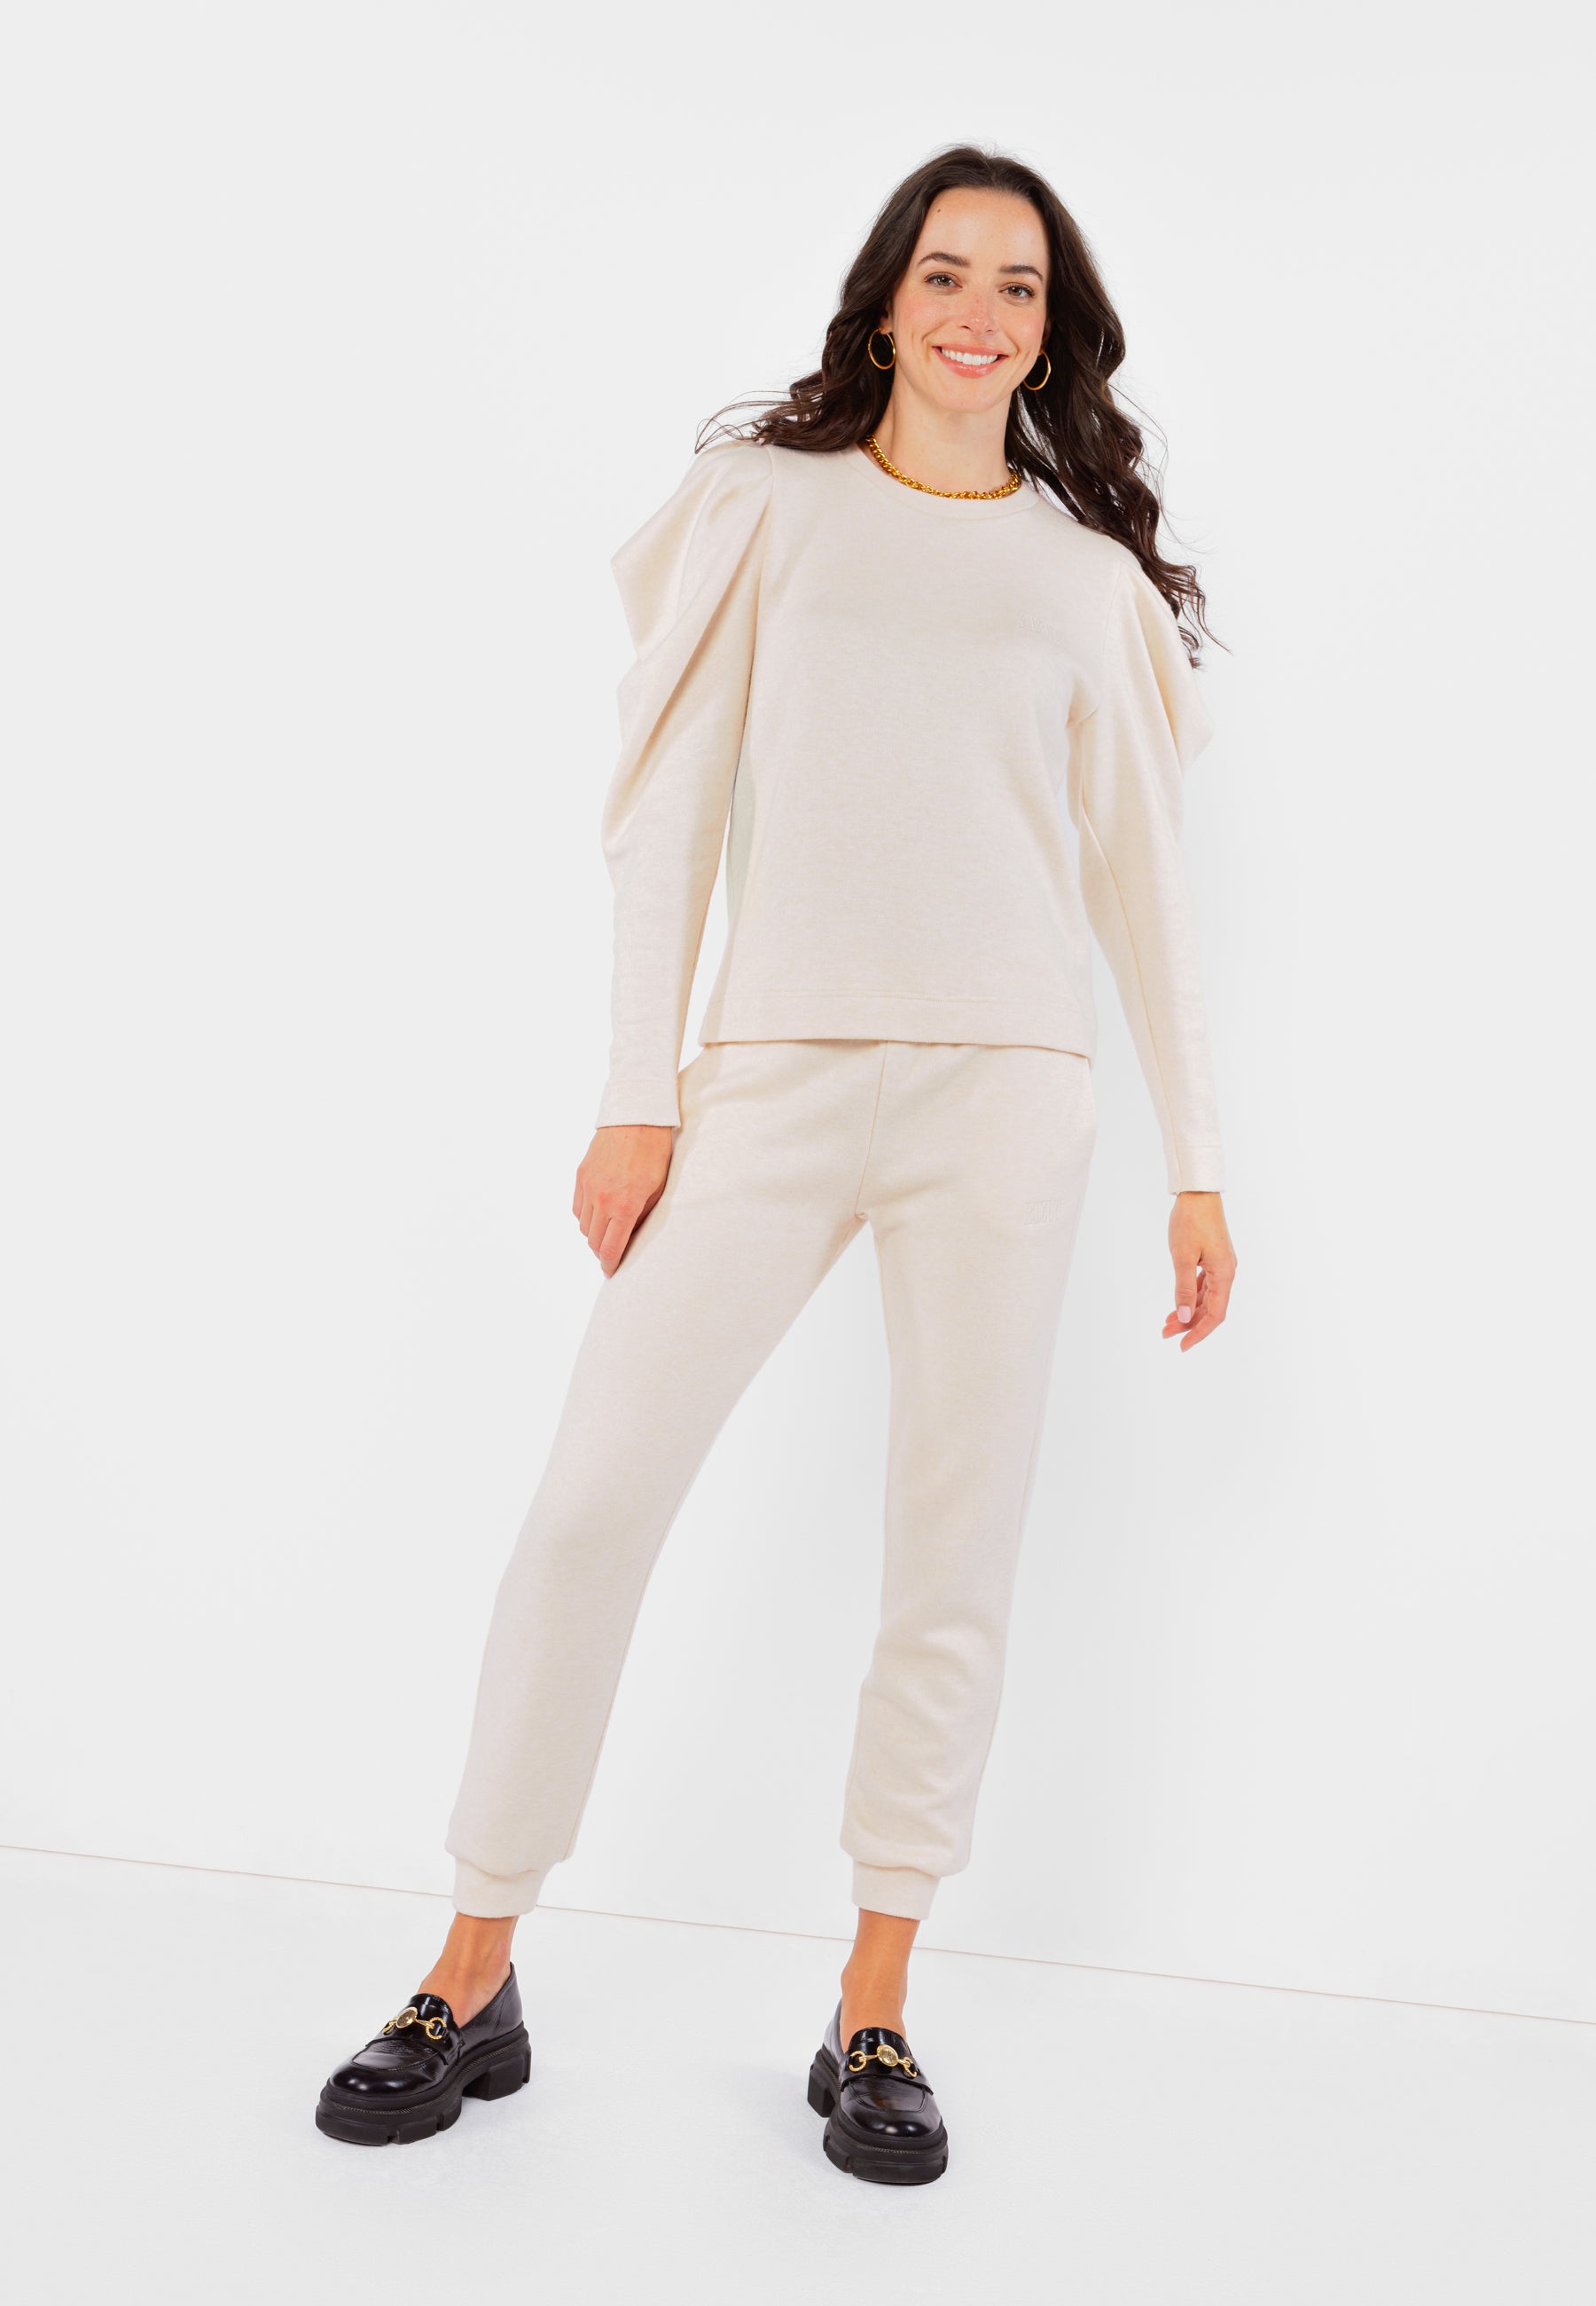 IDIKA beige knitted trousers with a logo